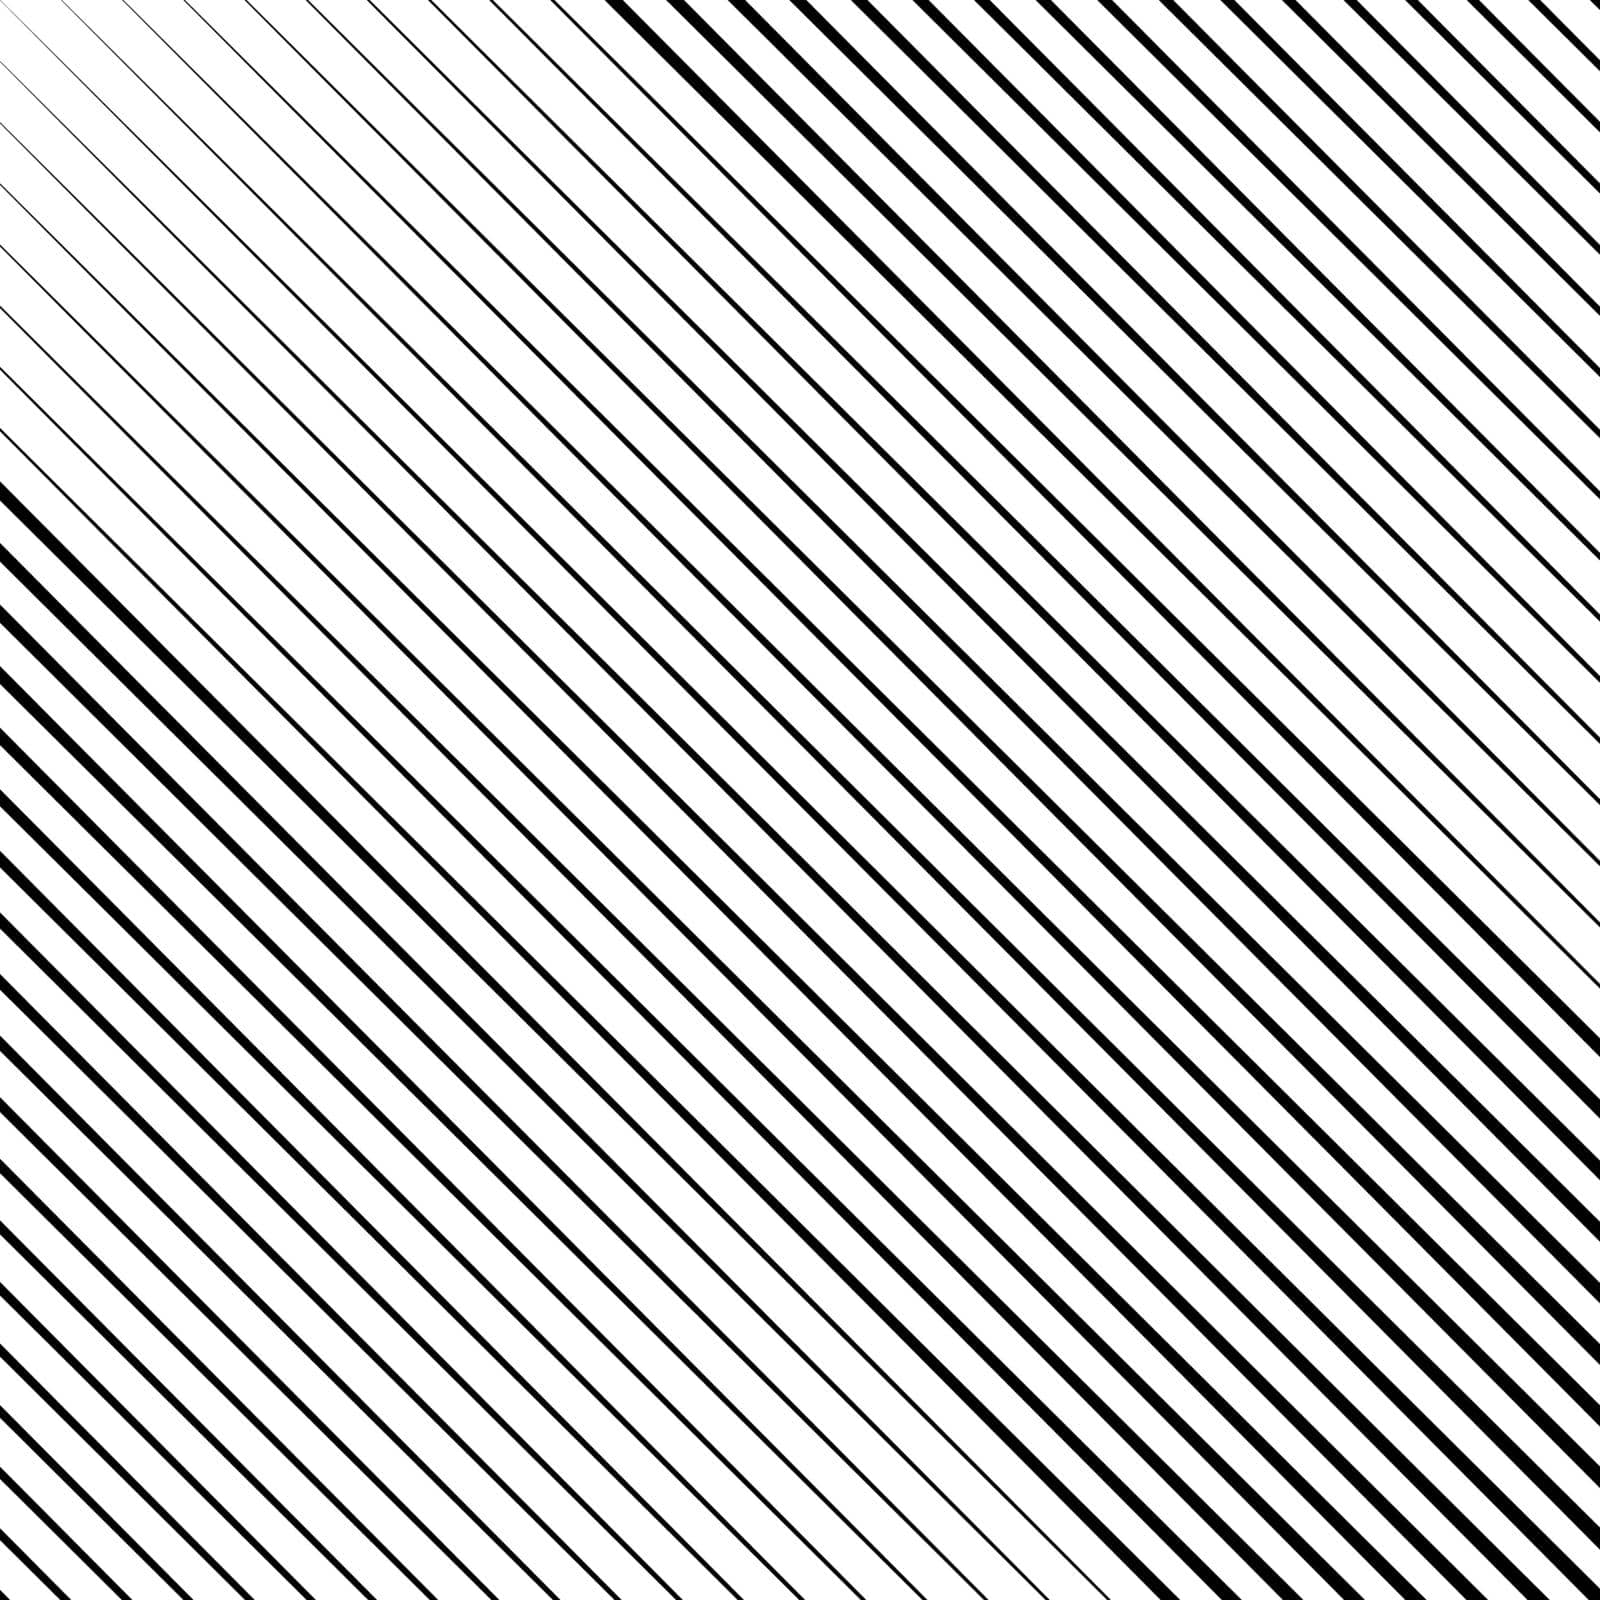 Oblique edgy line pattern background. Vector eps10